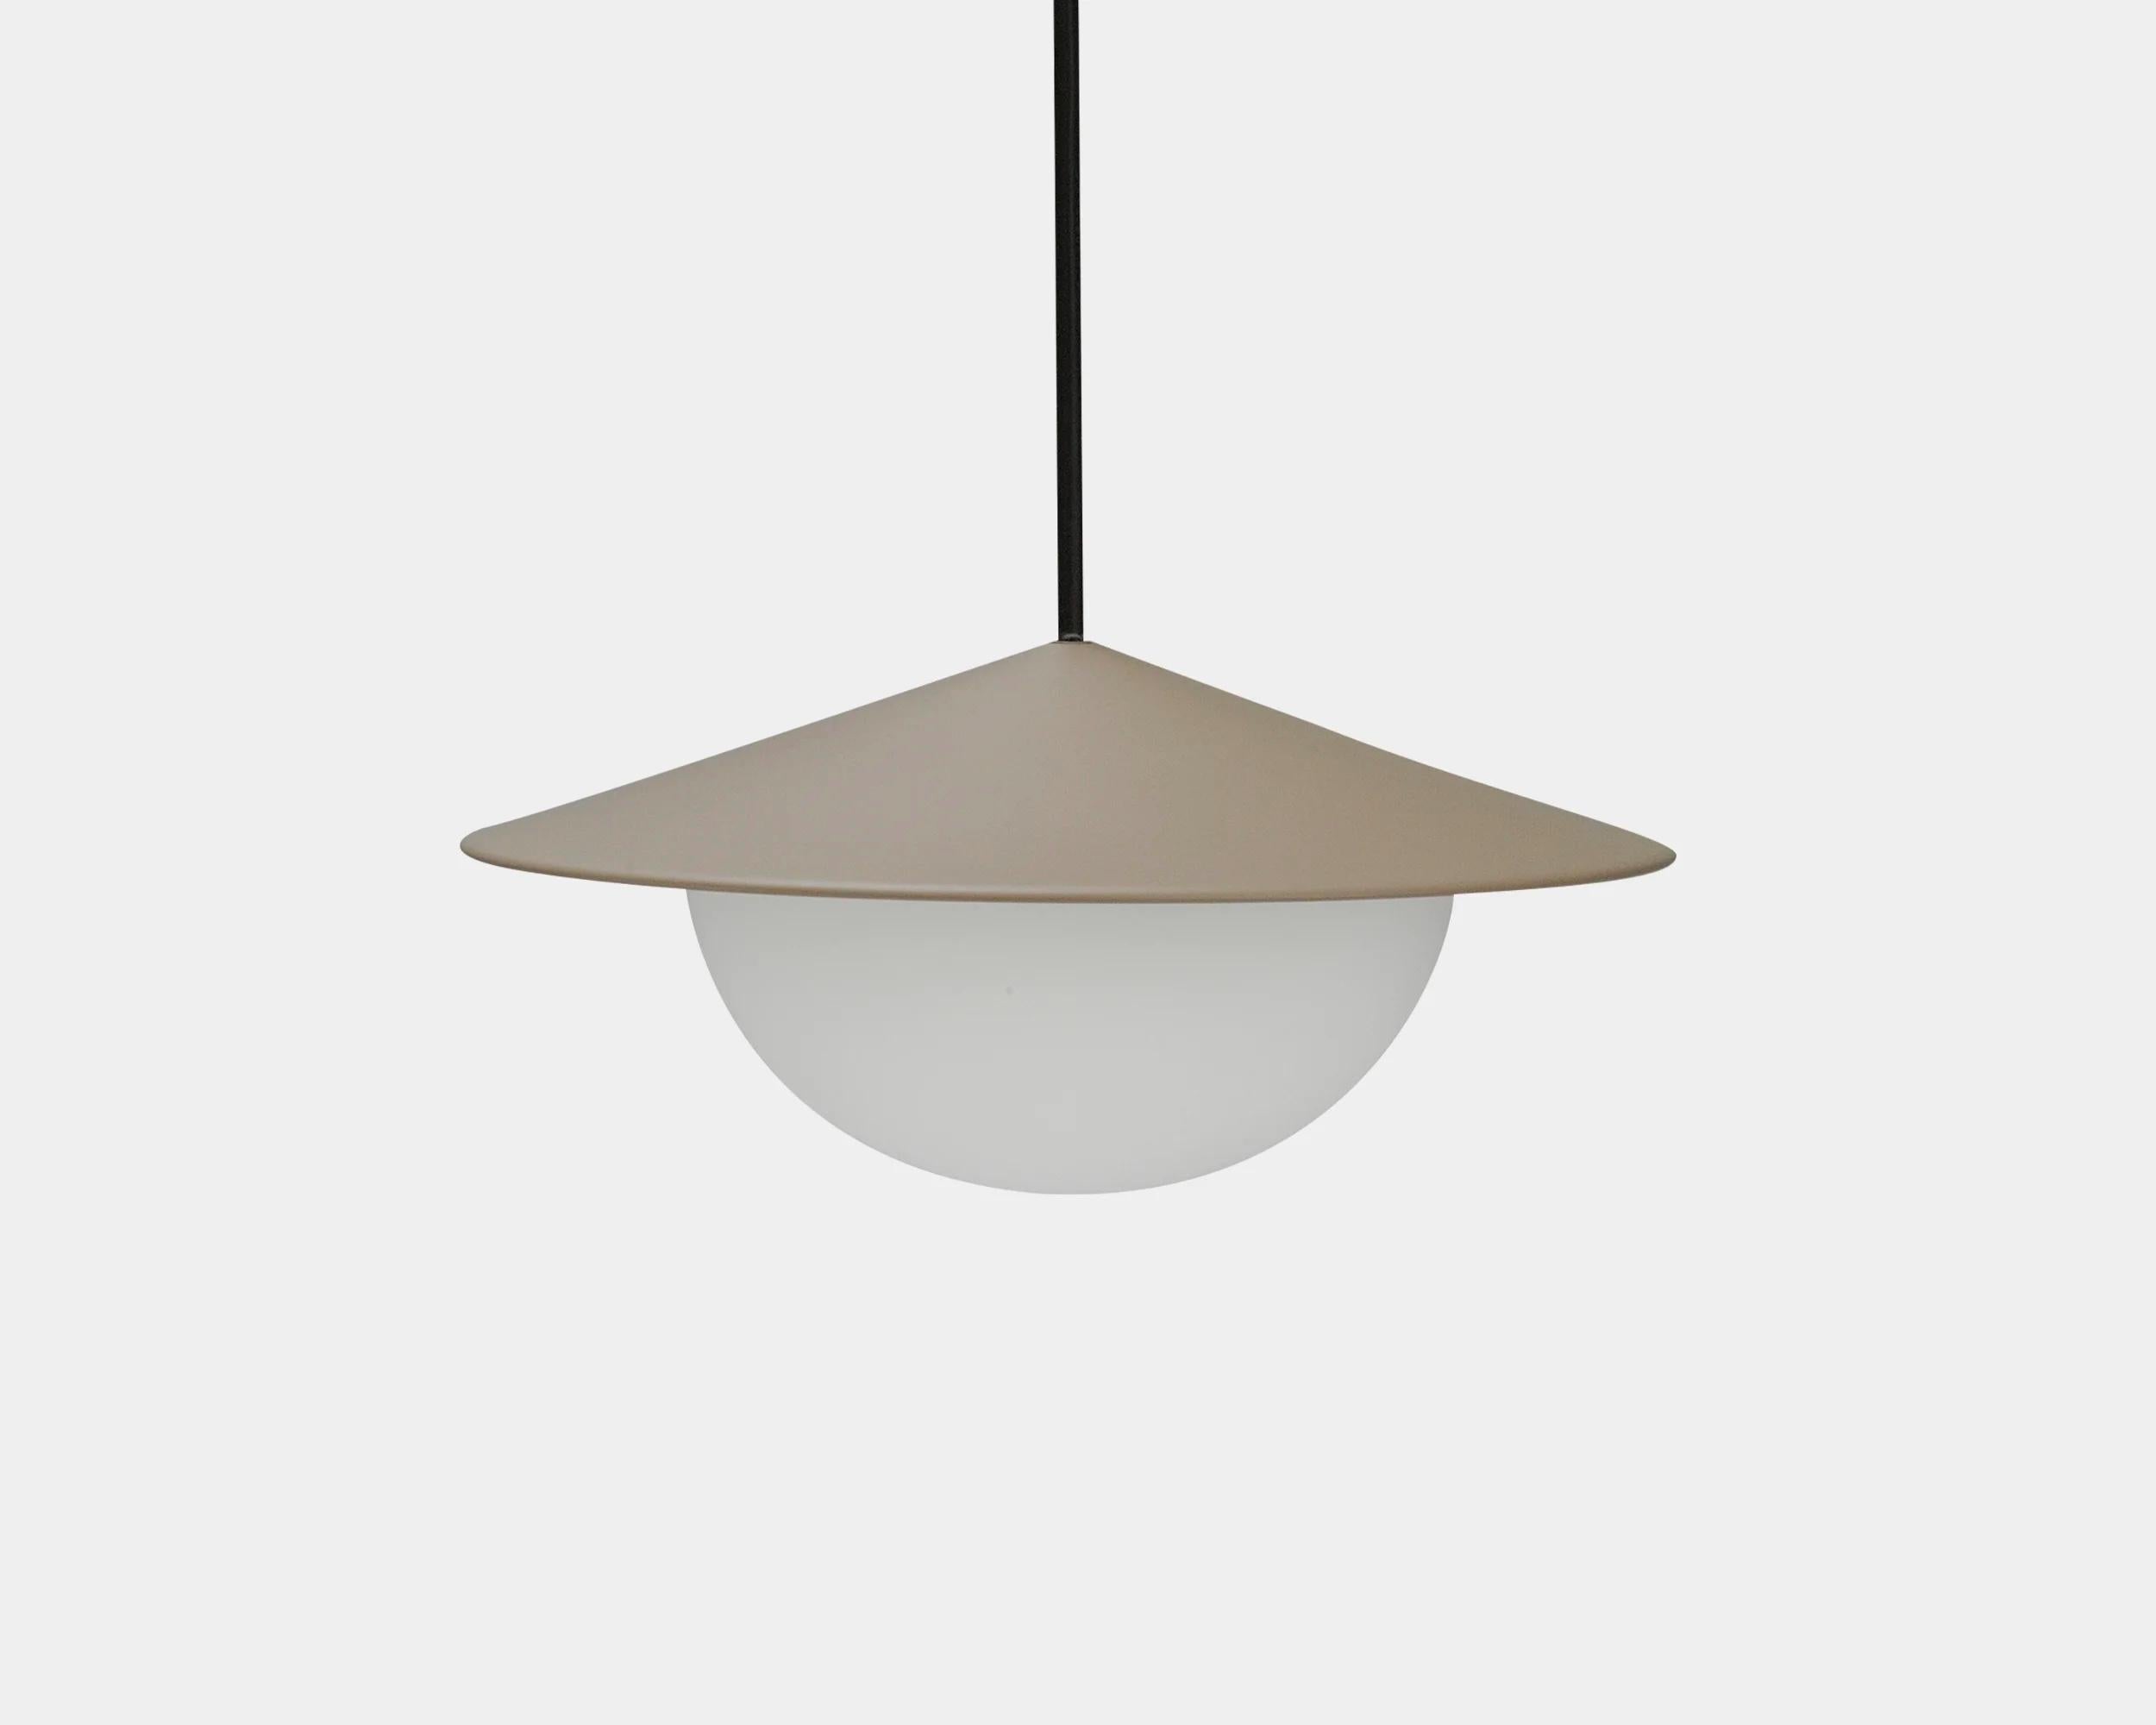 Alley pendant lamp by AGO Lighting
UL Listed

Painted aluminum, white opal glass
LED G9 110-240V (not included)

Available colors:
Charcoal, white, grey, burgundy, green, mustard, dark blue, mud grey, brick red

Dimensions:
15,8 x 34 cm (Large)
11 x